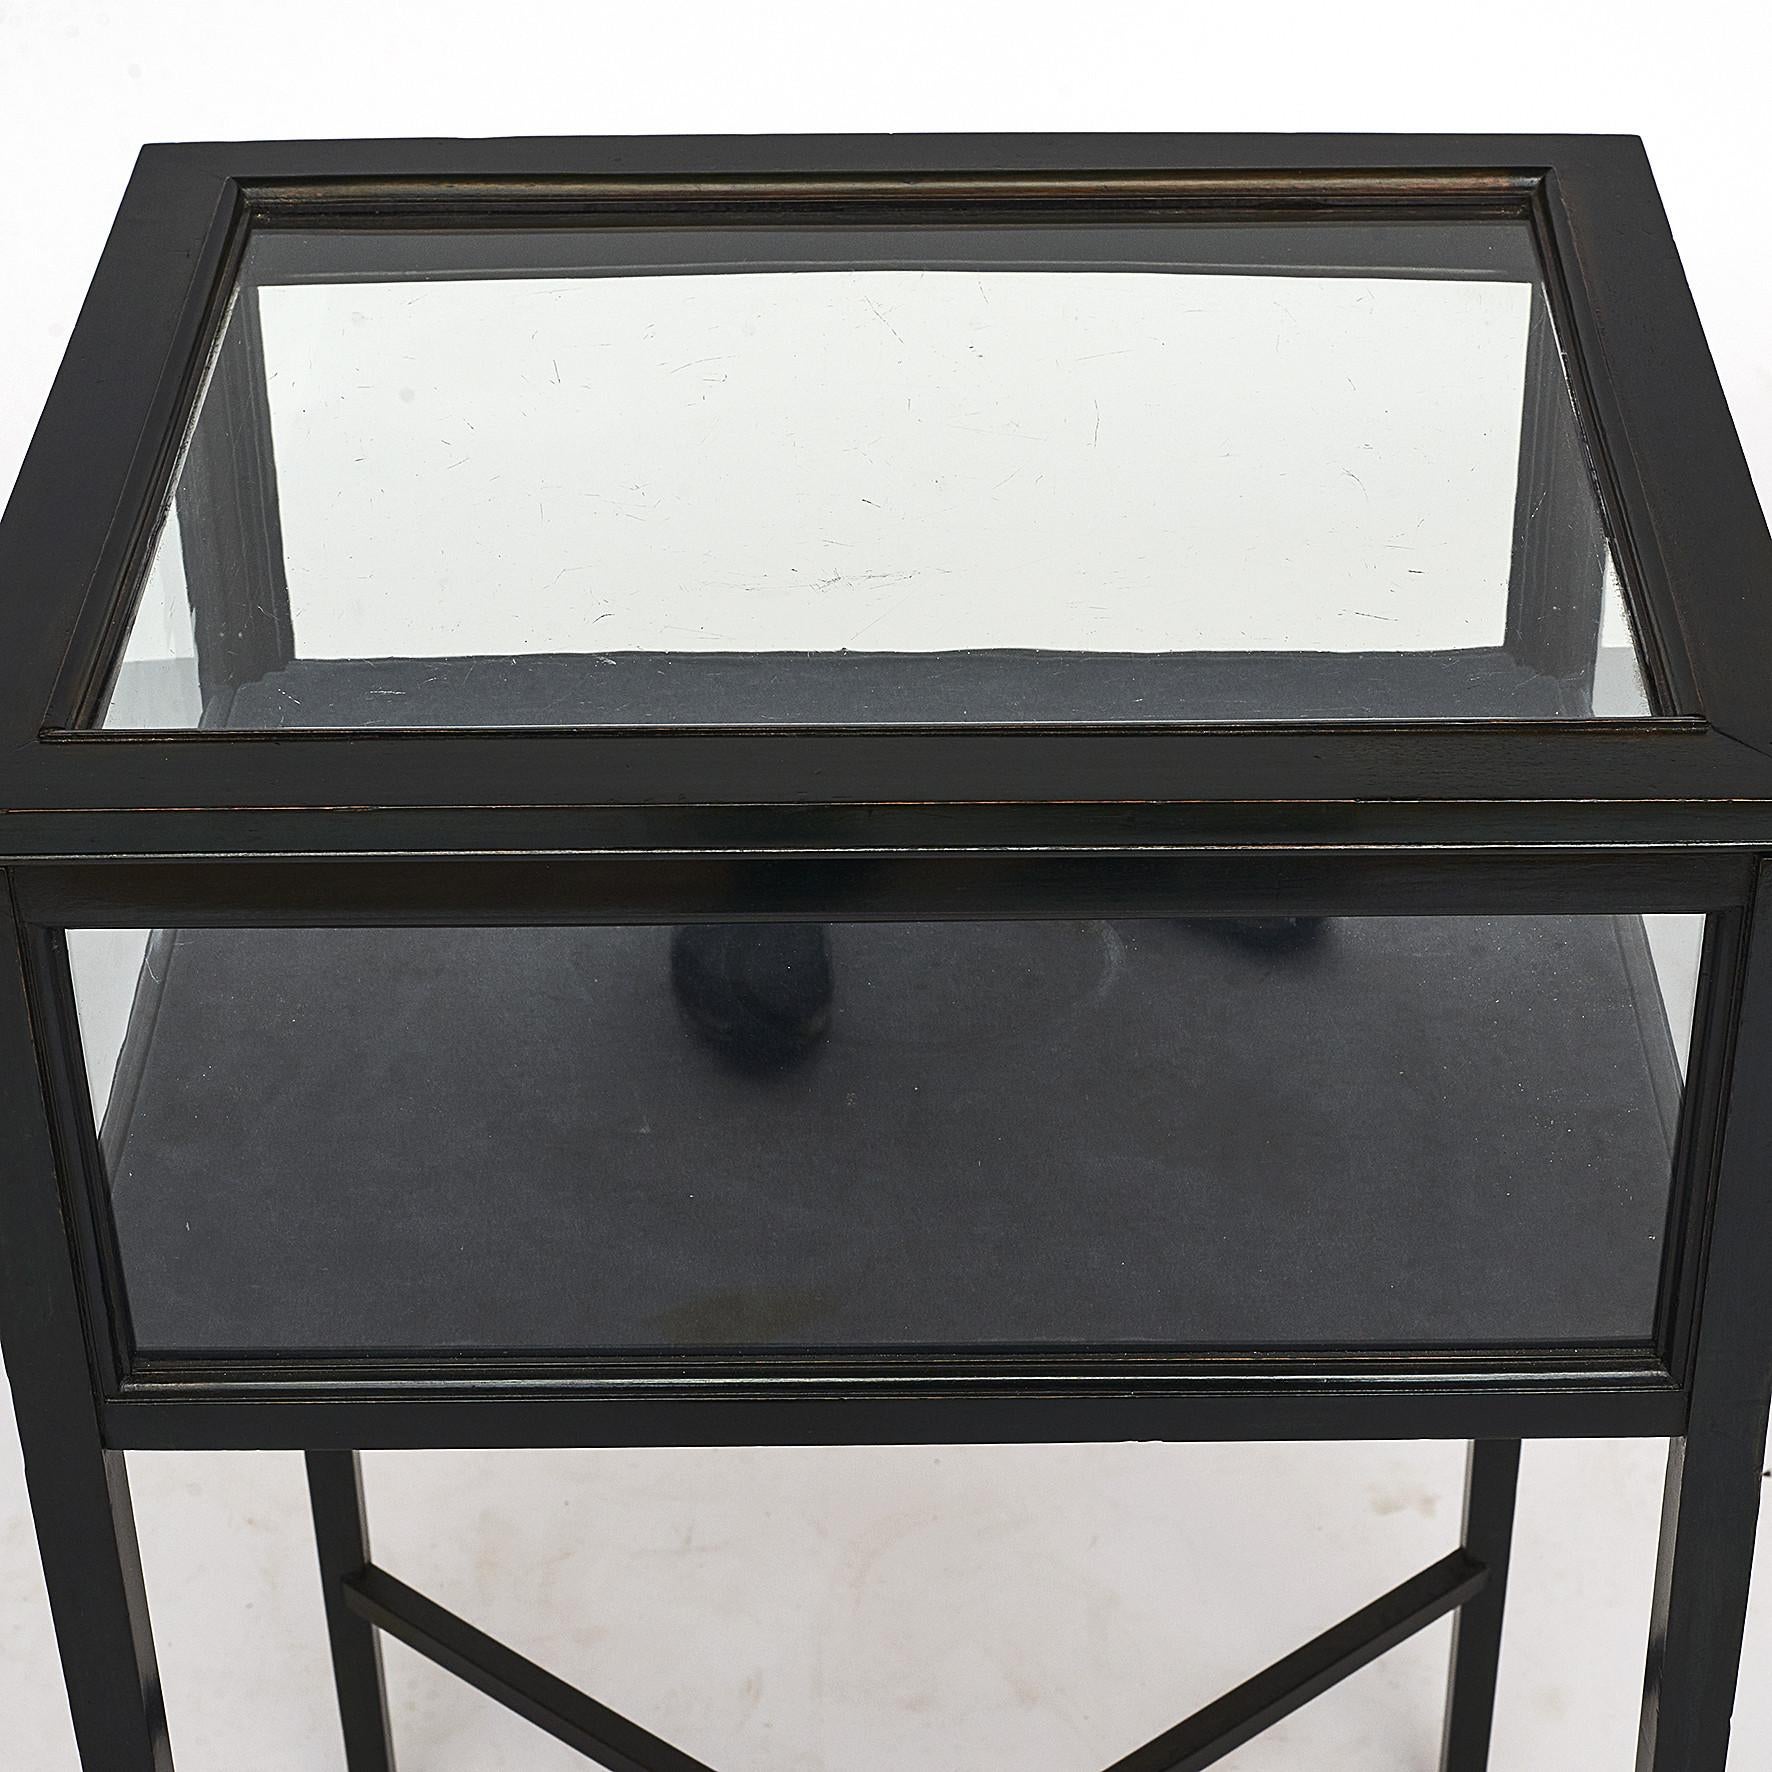 Elegant display case, Denmark, circa 1920-1930.
Glass on top and on all four sides. The case opens from the top. The base of the cabinet has a blue velvet liner.
Dark green-blue (almost black) frame with French polish on 4 tapered legs joined by a